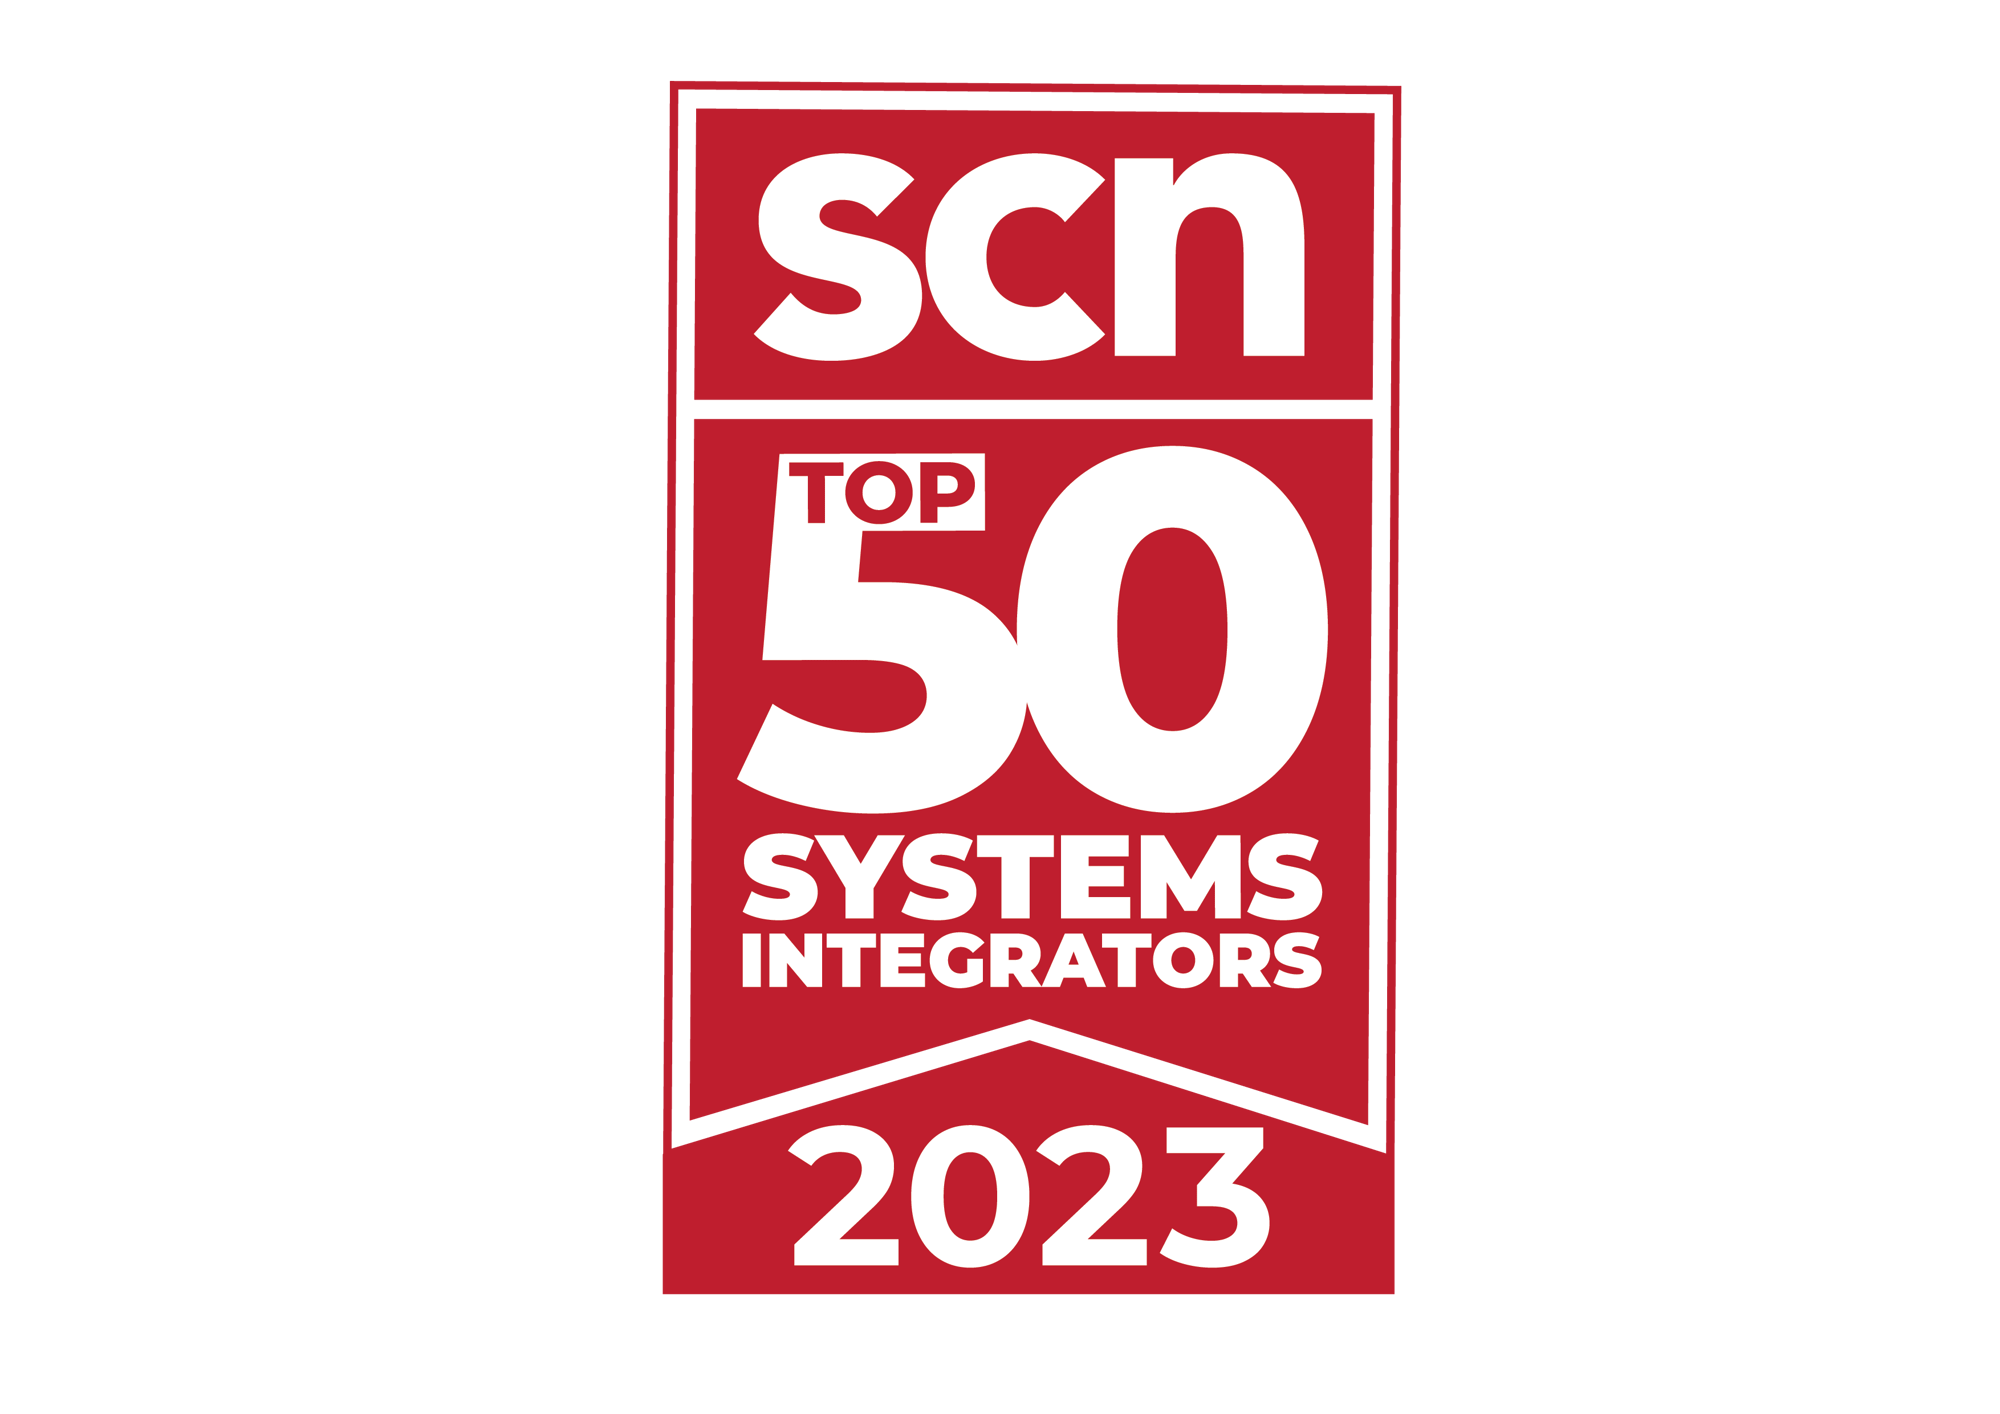 SCN TOP50 SYSTEMS INTEGRATORS logo WITH DATE ON-02